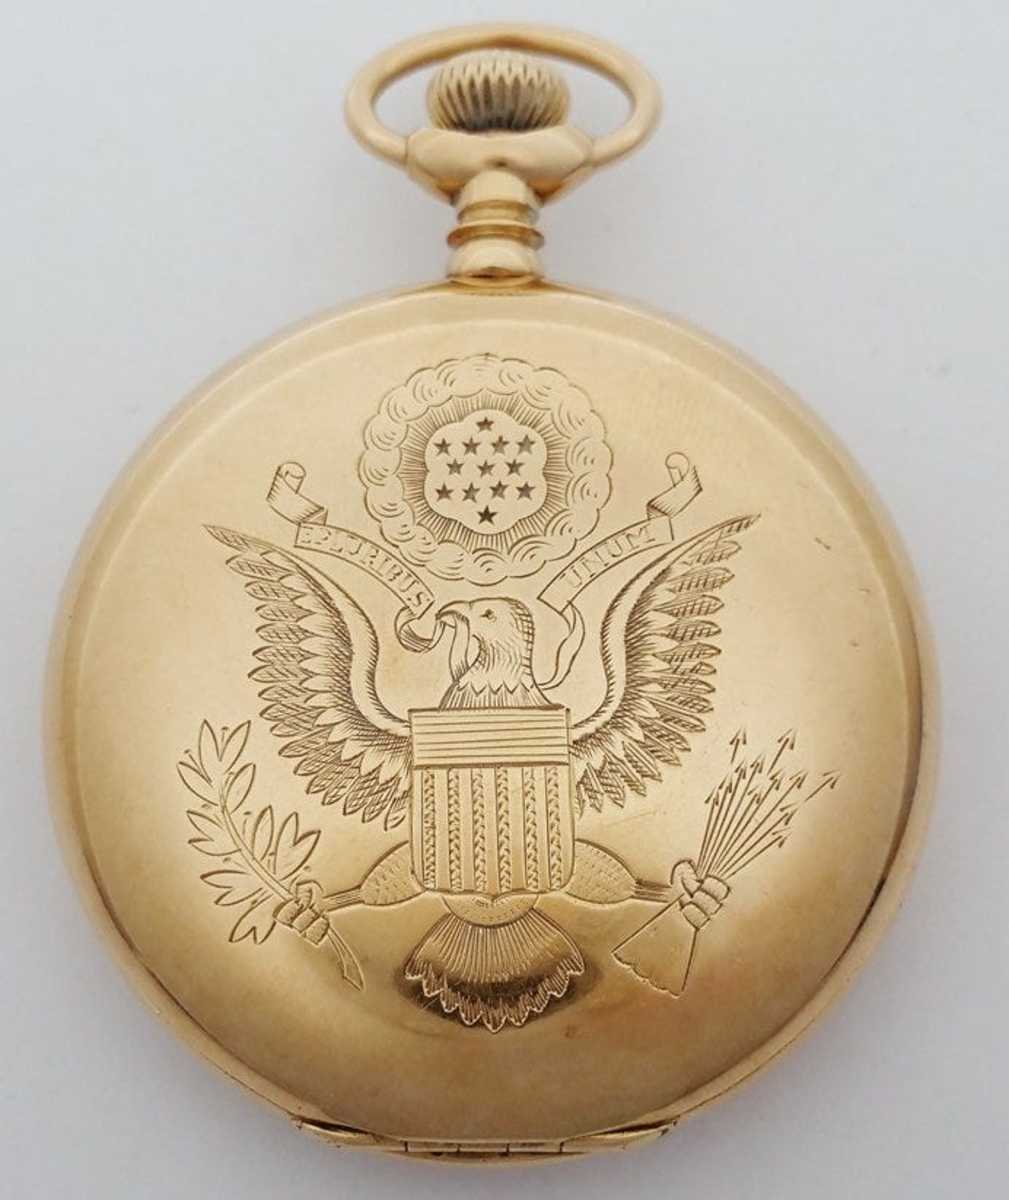 Rare Presidential Seal Waltham 14k gold 23J 16s Maximus Shipwreck Award pocket watch, circa 1900s, inscription in cuvet reads, "From The President of The United States Captain Chr. Christensen of the Danish Steamship Generalconsul Pallisen in recognition of his humane services in effecting the rescue. Oct 4th 1908 of the Captain and crew of the American Schooner George Sturgis wrecked at sea"; estimate: $6,000-$8,000.